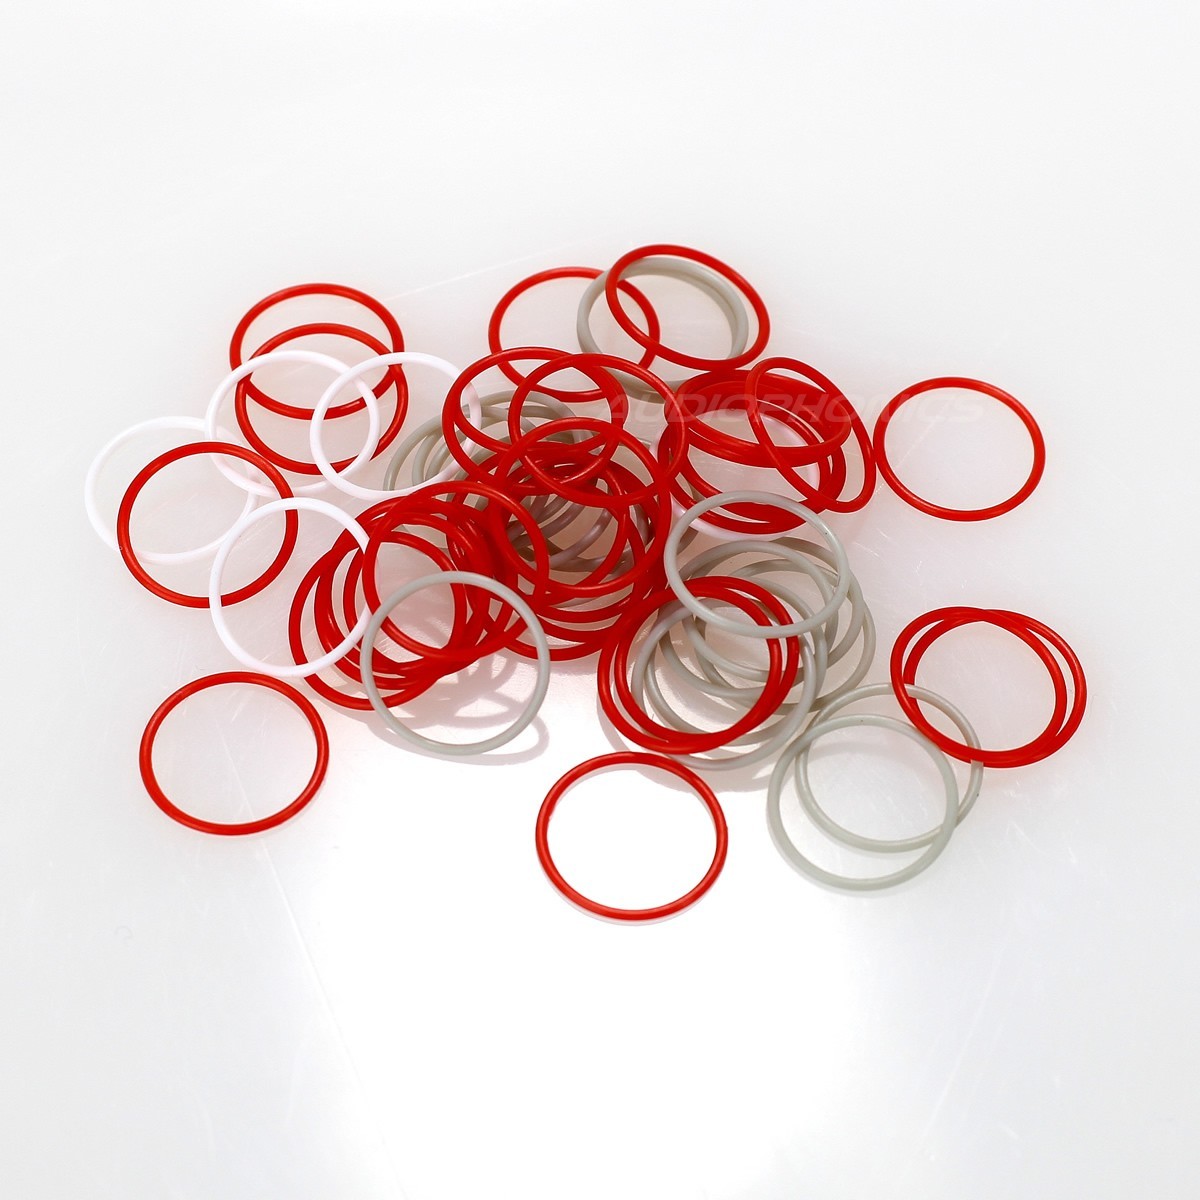 Silicone O Ring 1 mm thickness White (x10) Ø8mm